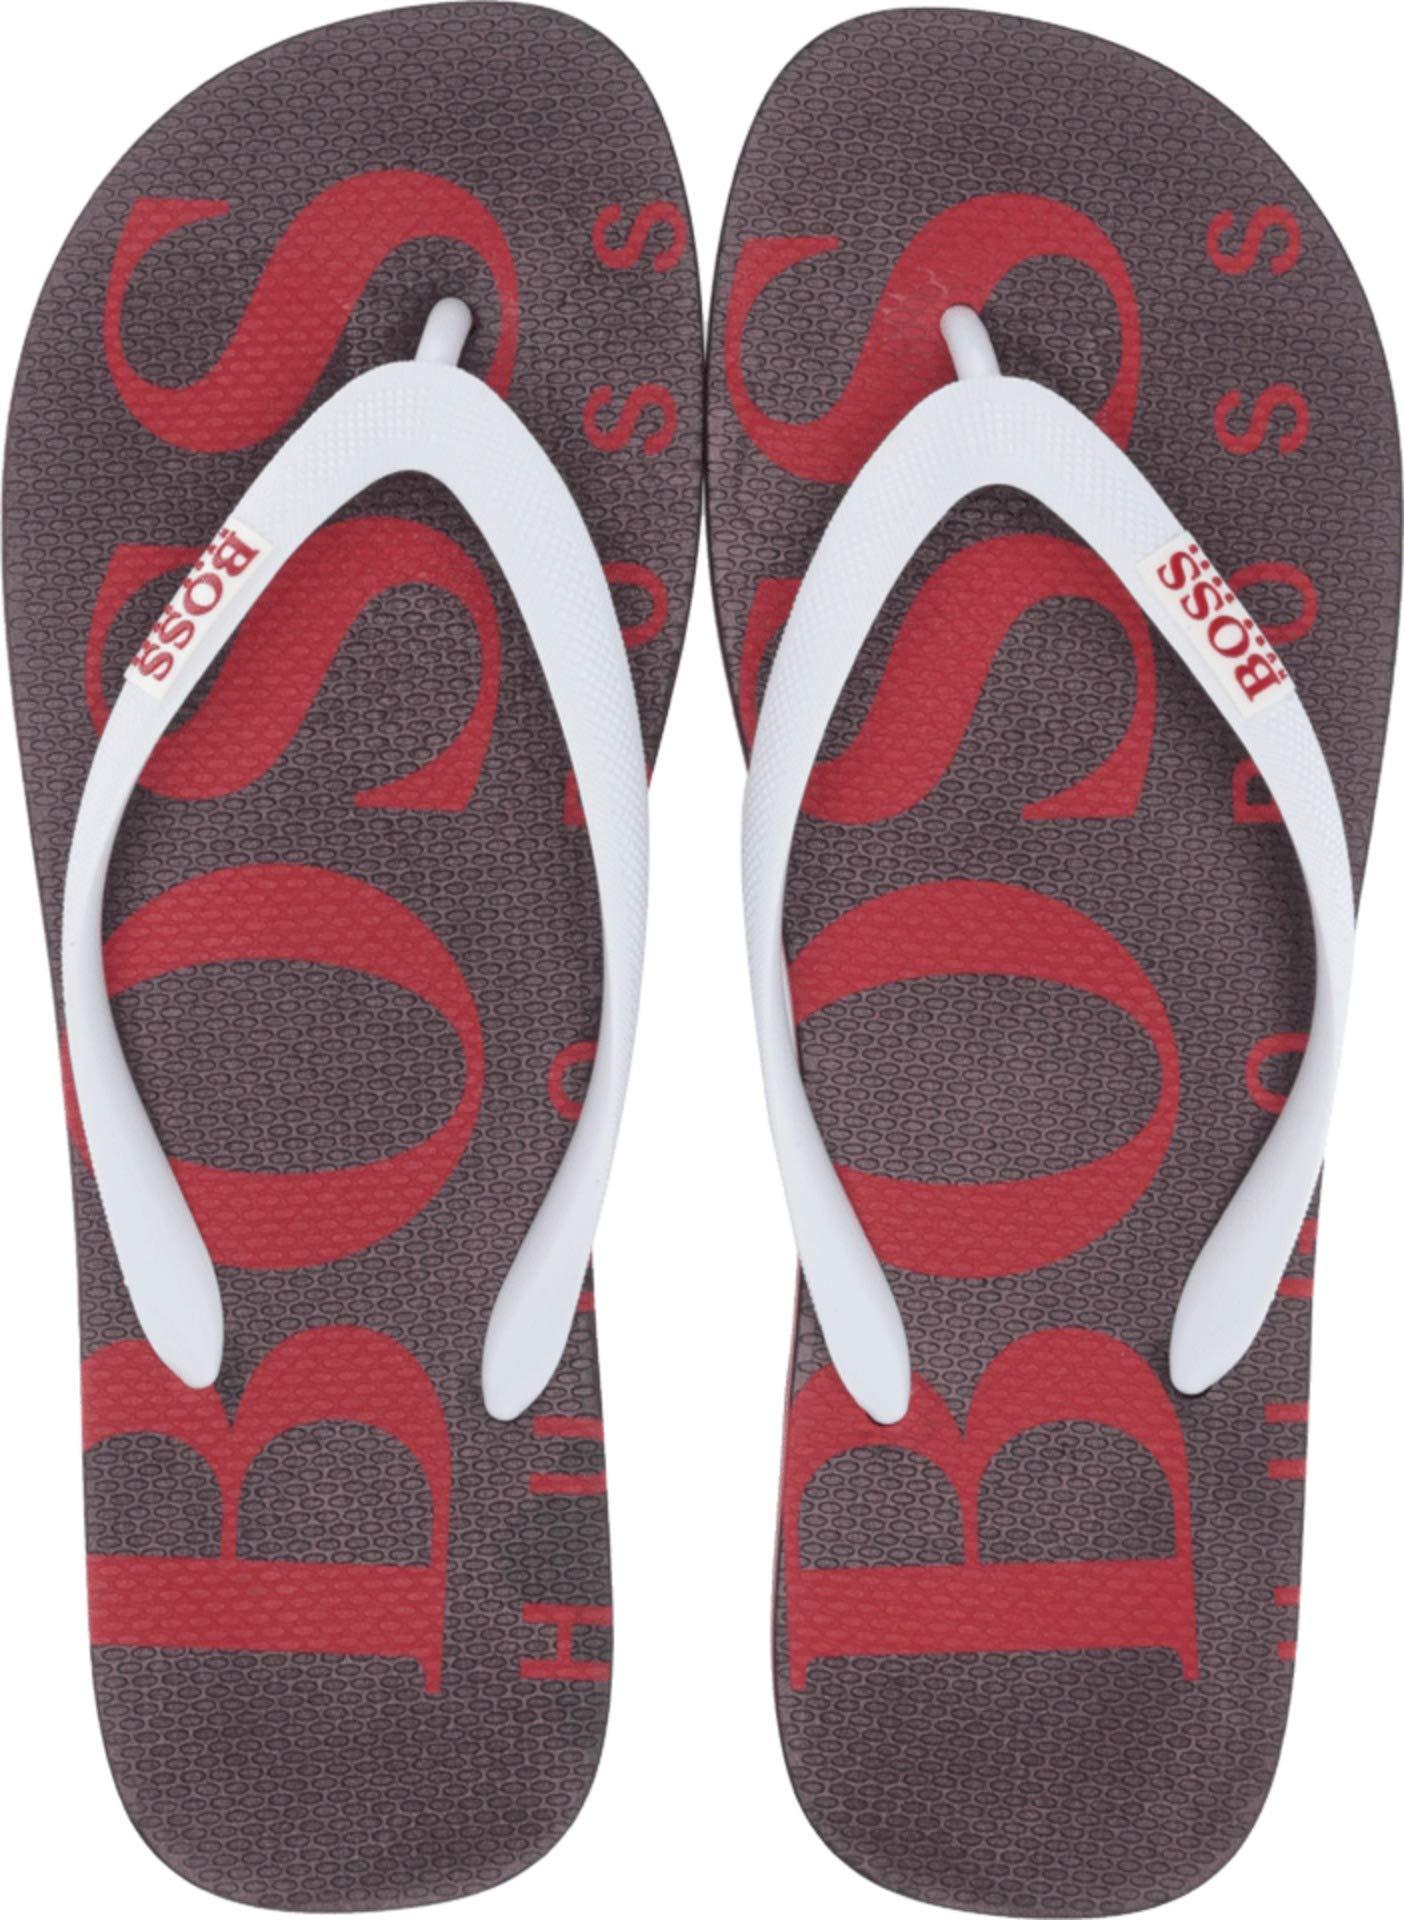 BOSS Synthetic Wave Thong Rubber Sandal Flip-flop in Red for Men - Save ...